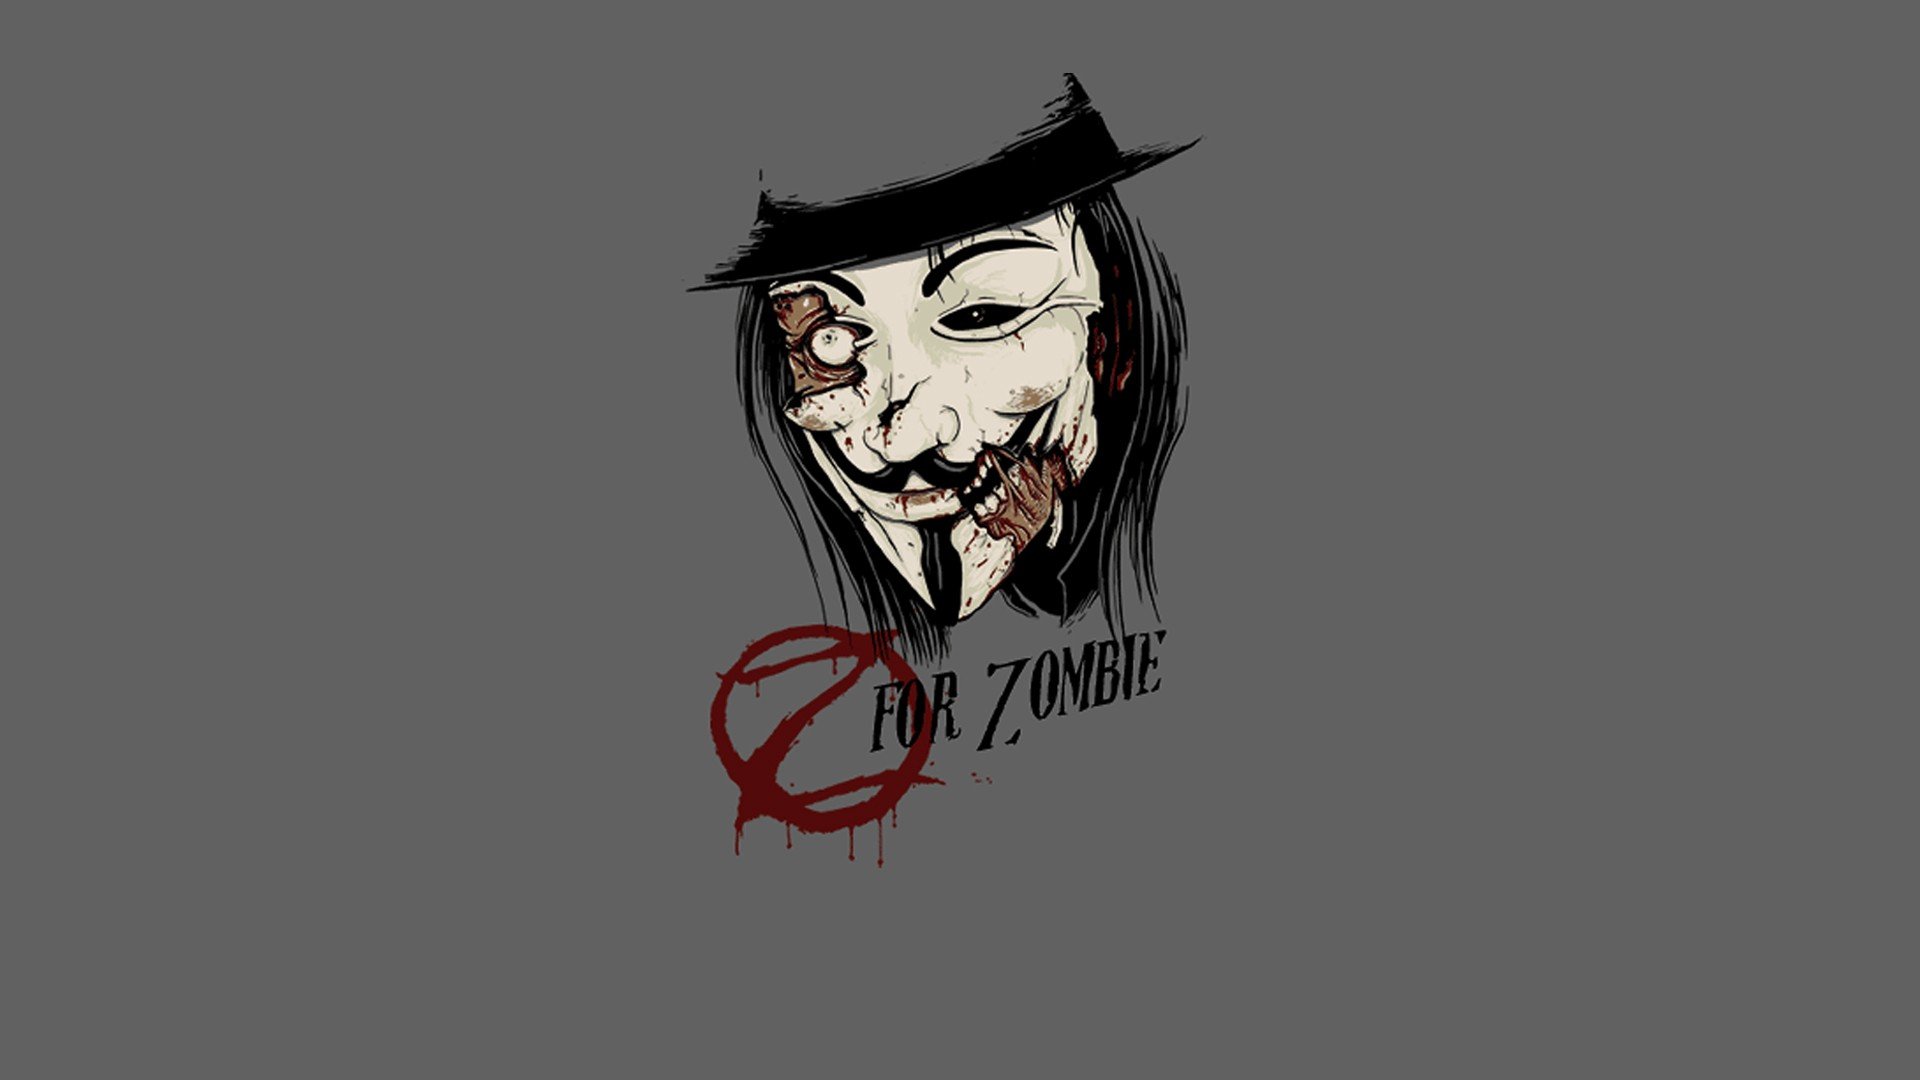 Minimalistic Zombies Funny Guy Fawkes Artwork Wallpapers Hd Desktop And Mobile Backgrounds